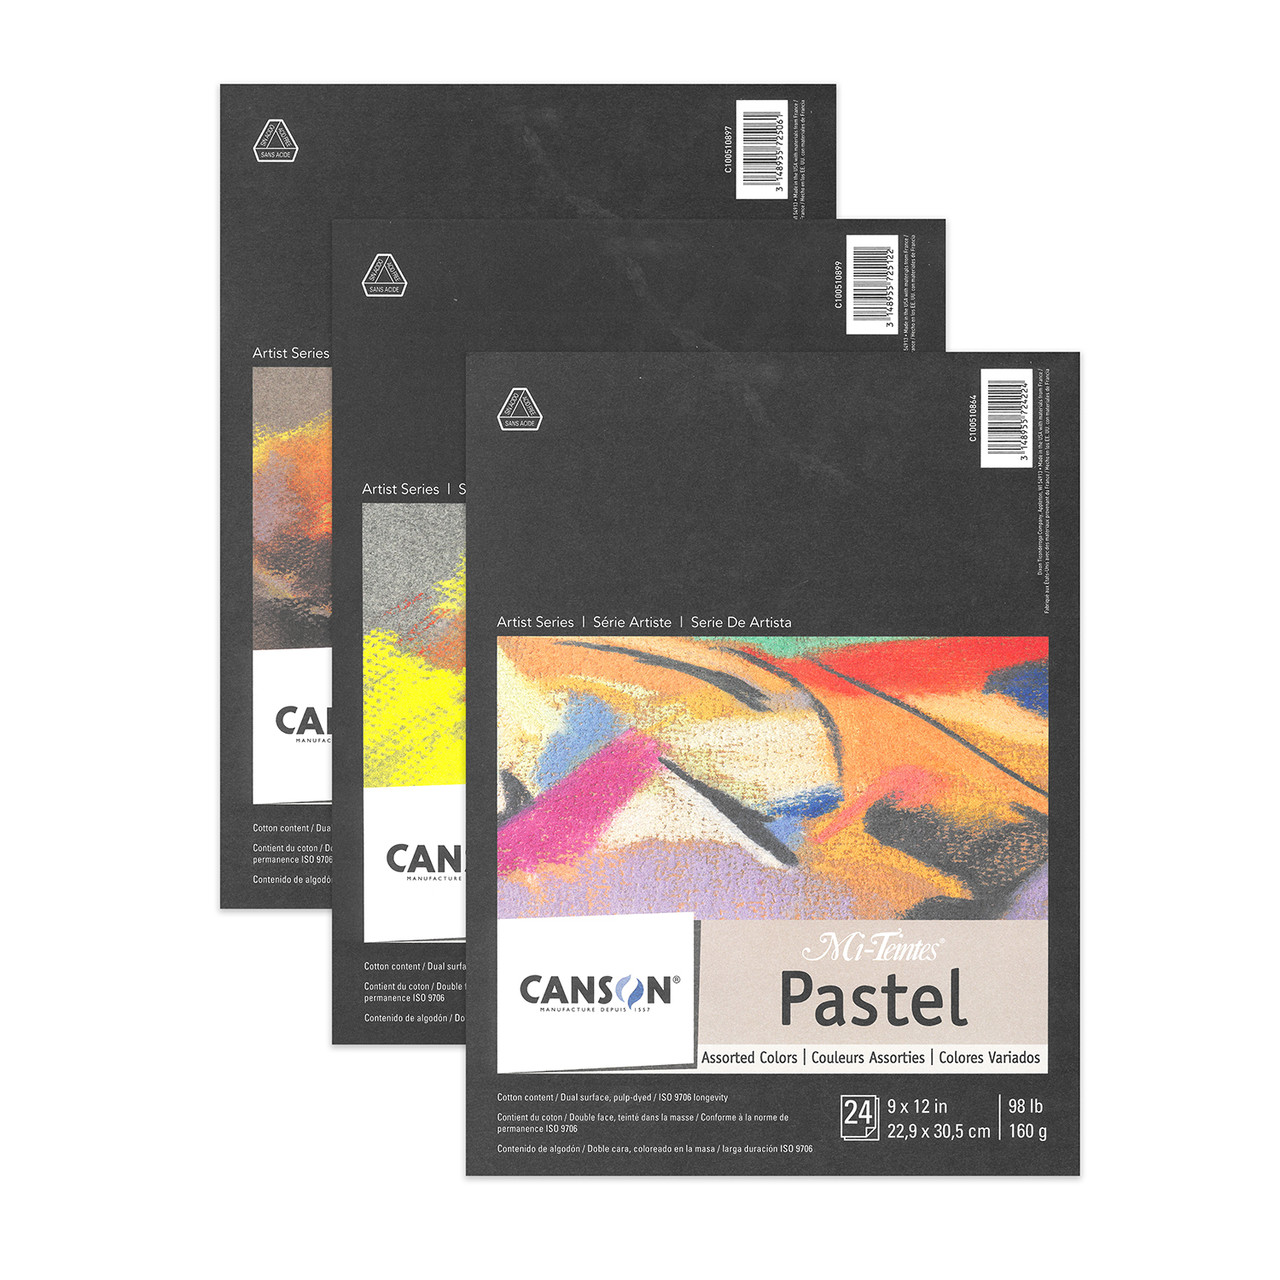 Canson - Artist Series Classic Cream Drawing Pad - 18 x 24